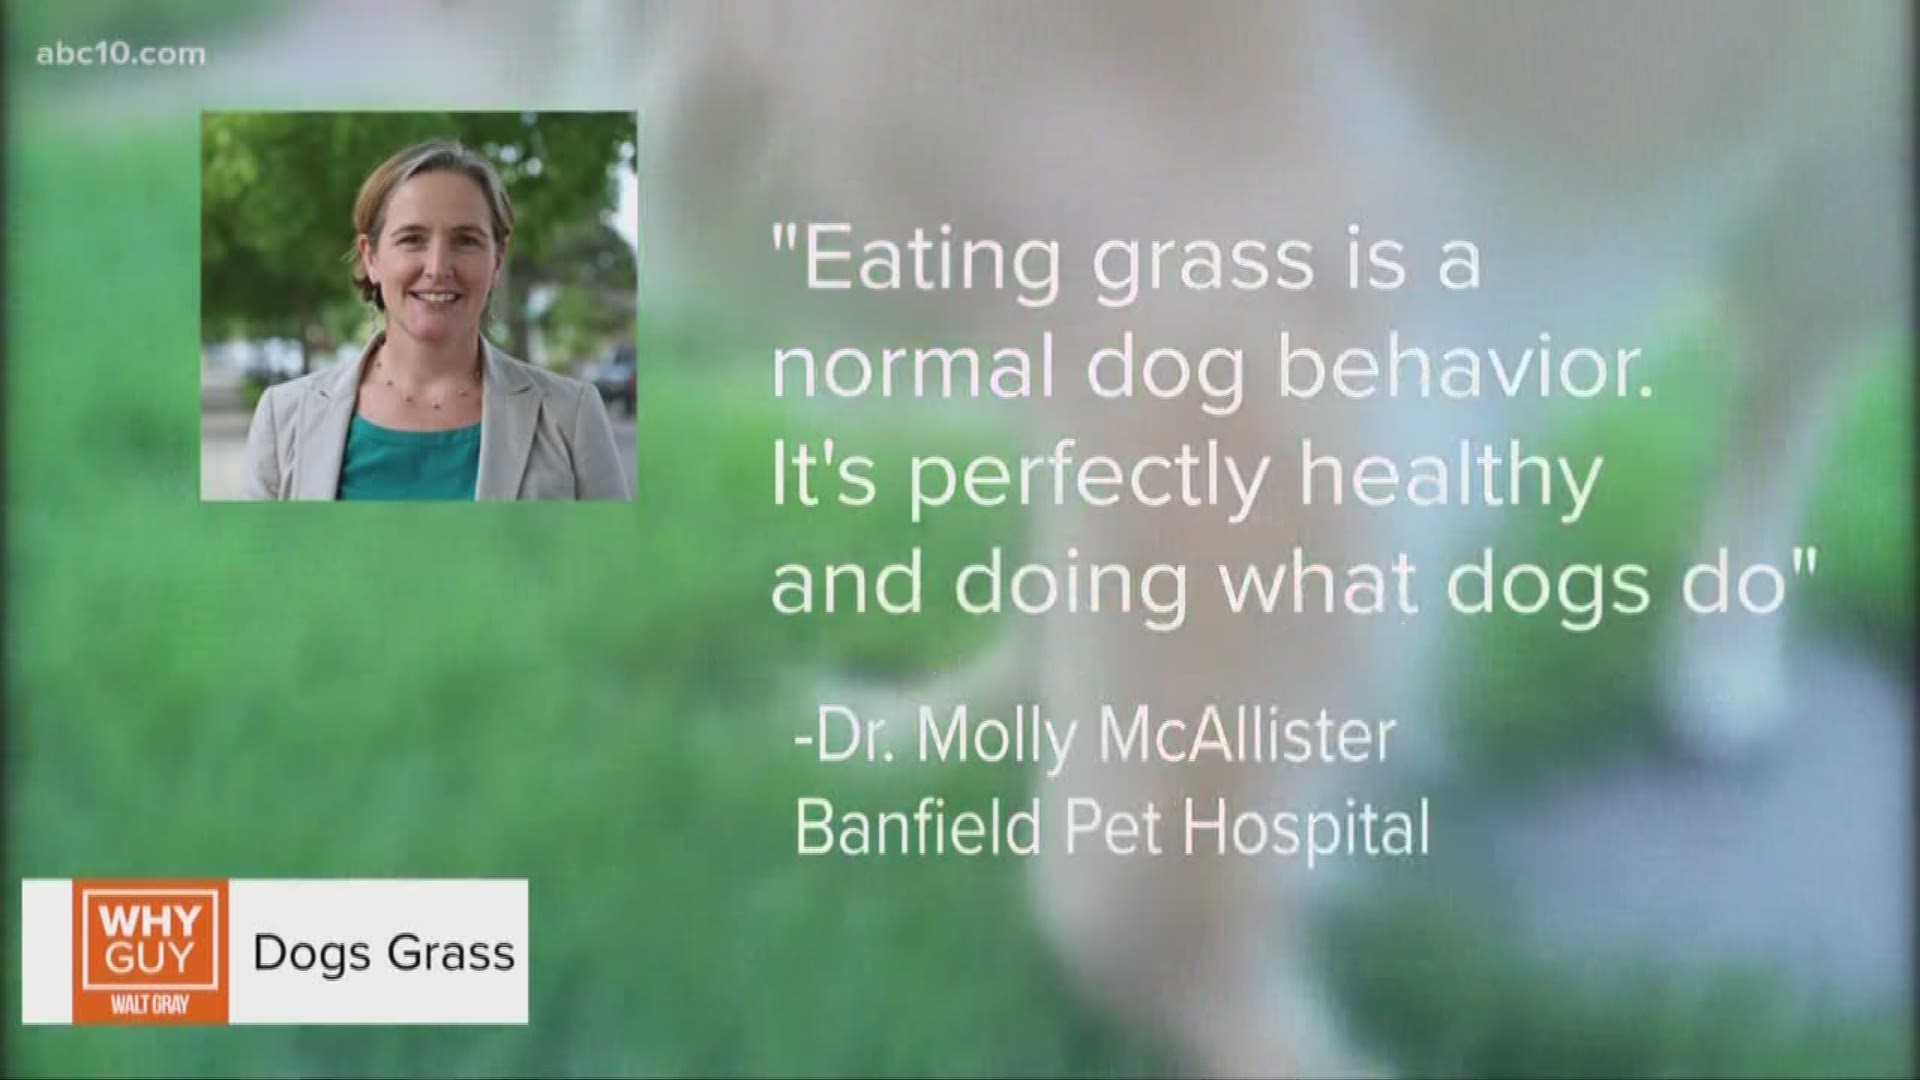 One of the most Googled why questions is, "why does my dog eat grass?" Walt looks into why Fido likes to snack on your lawn.